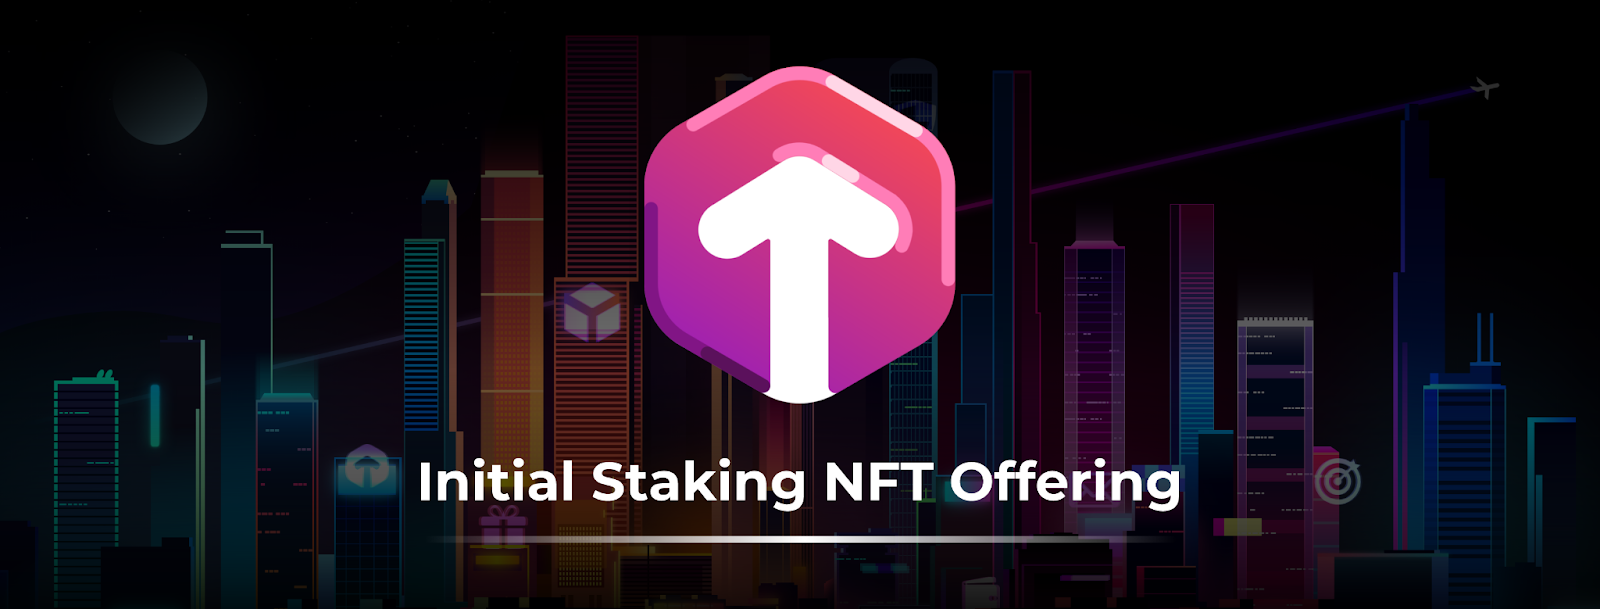 Introducing Initial Staking NFT Offering